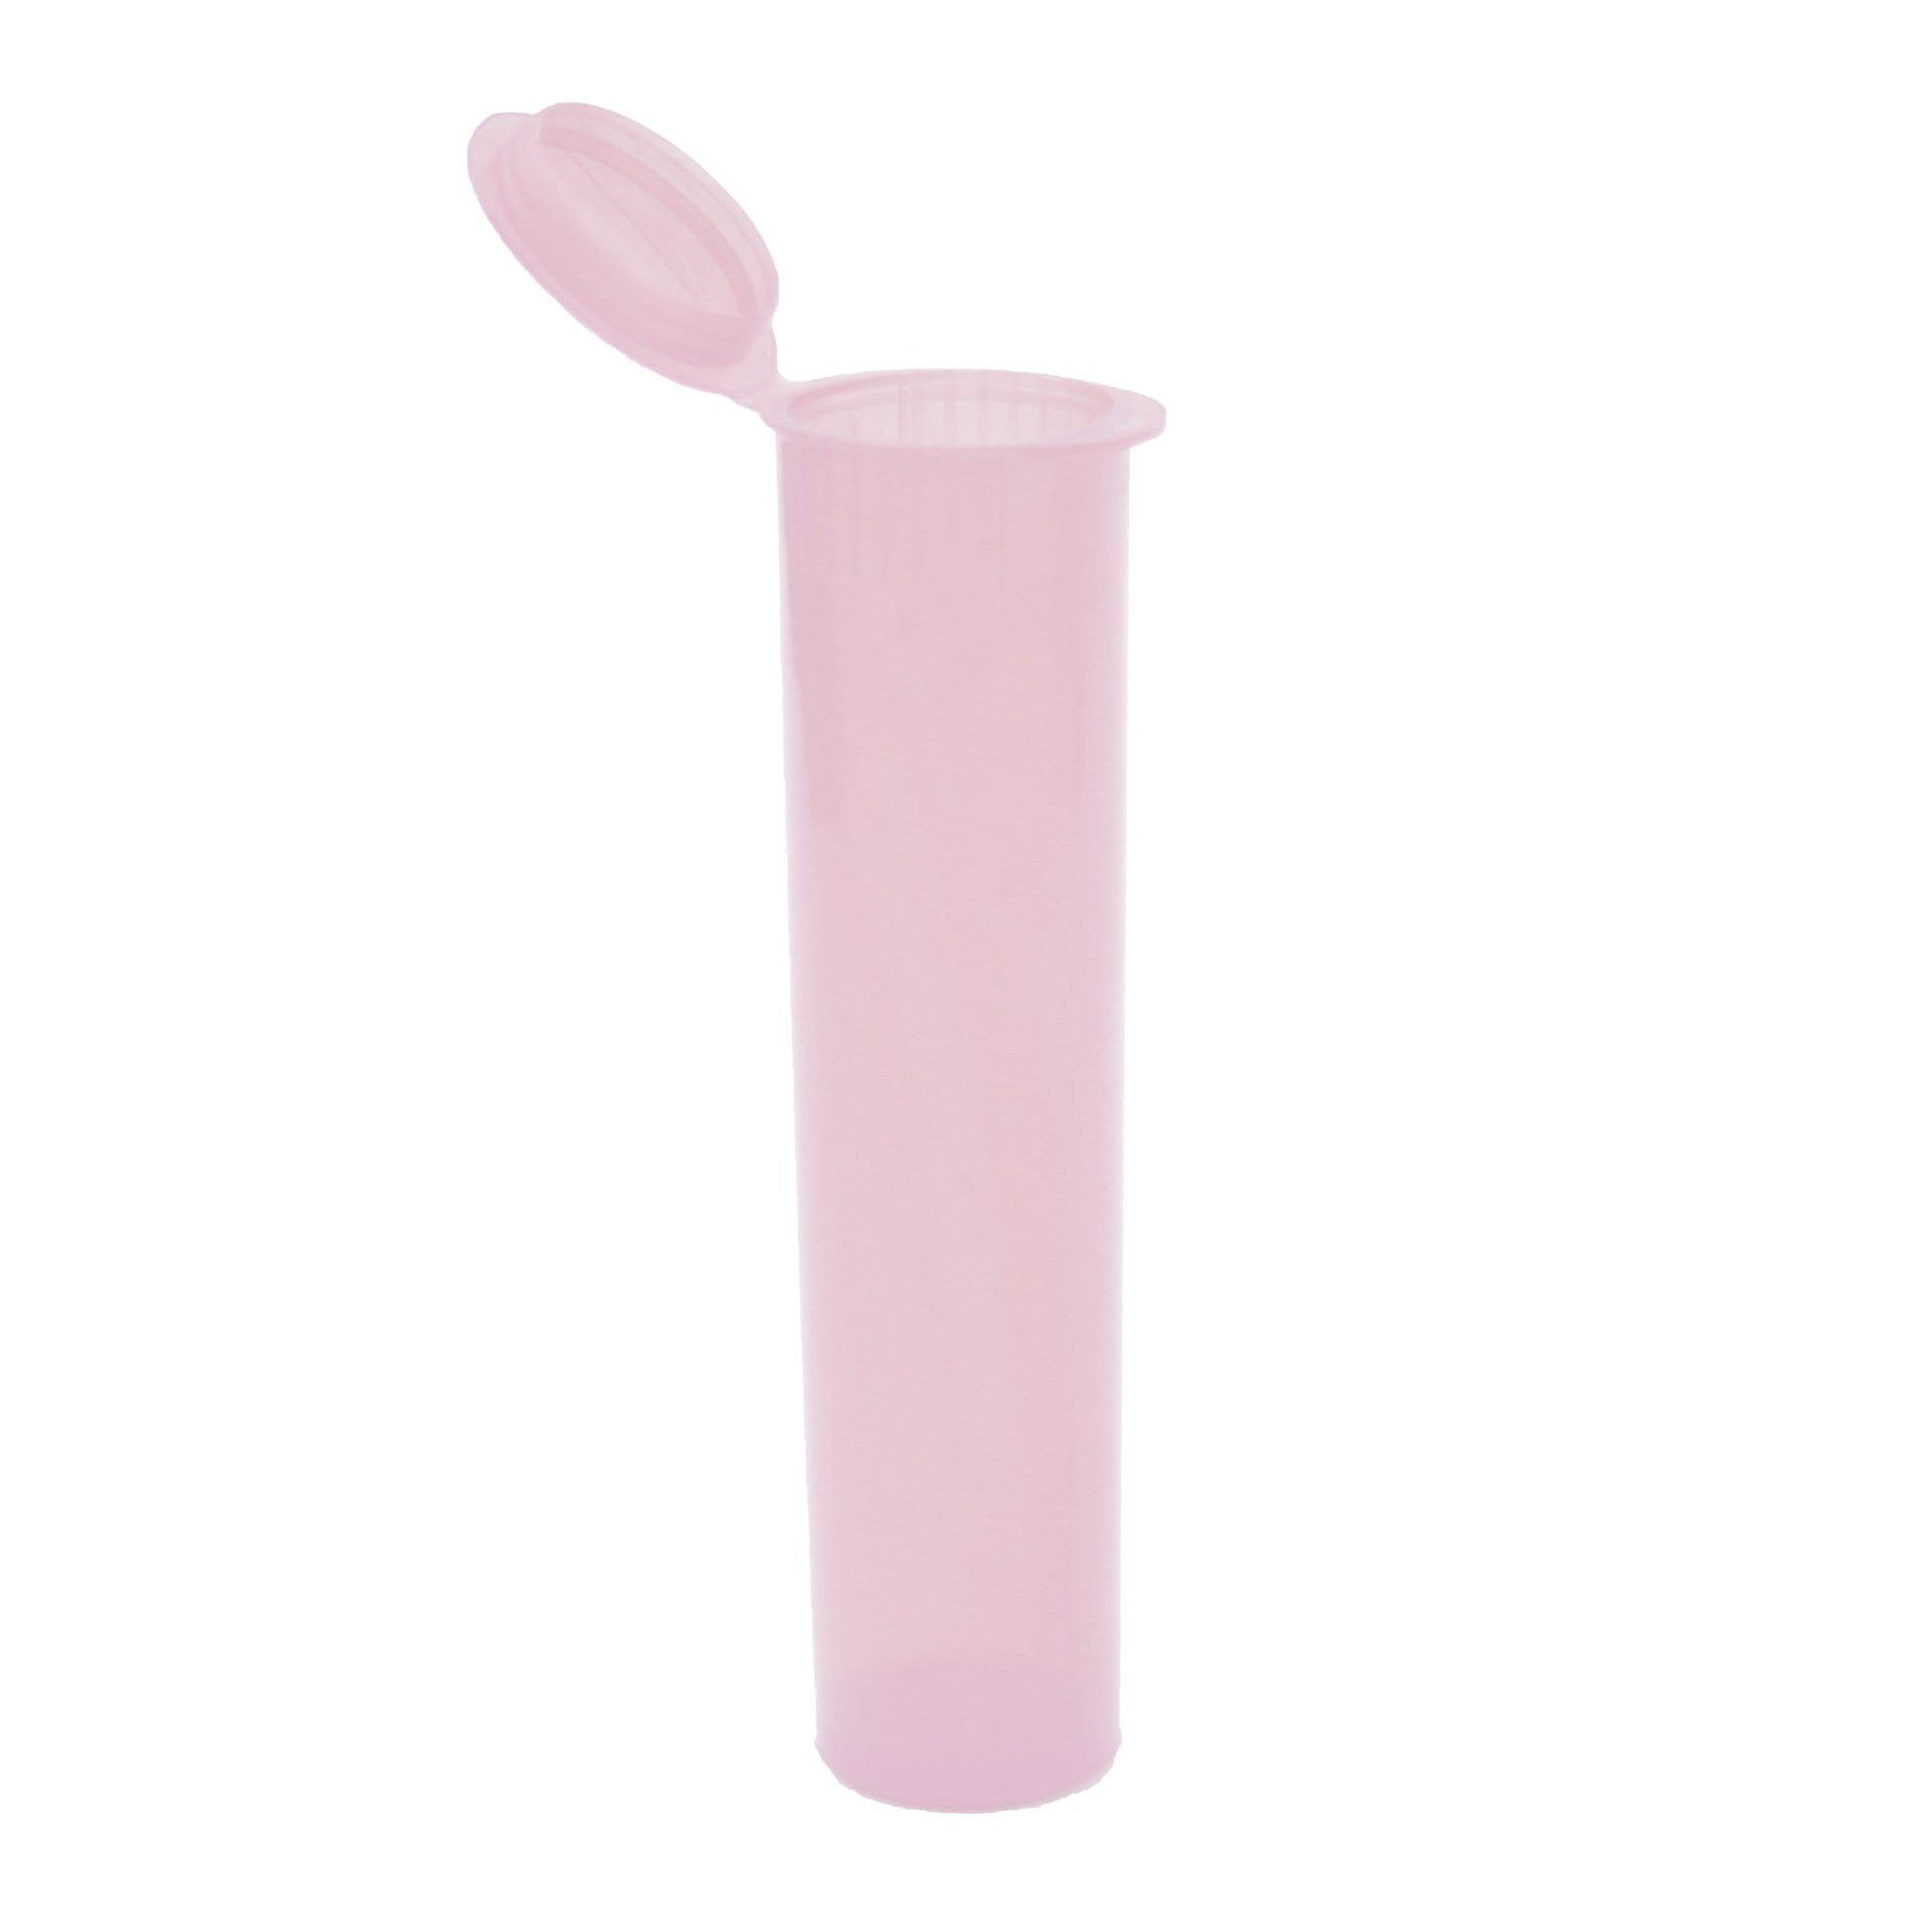 Translucent Squeeze Top Child-Resistant 78mm Pre-Roll Tube Translucent Pink